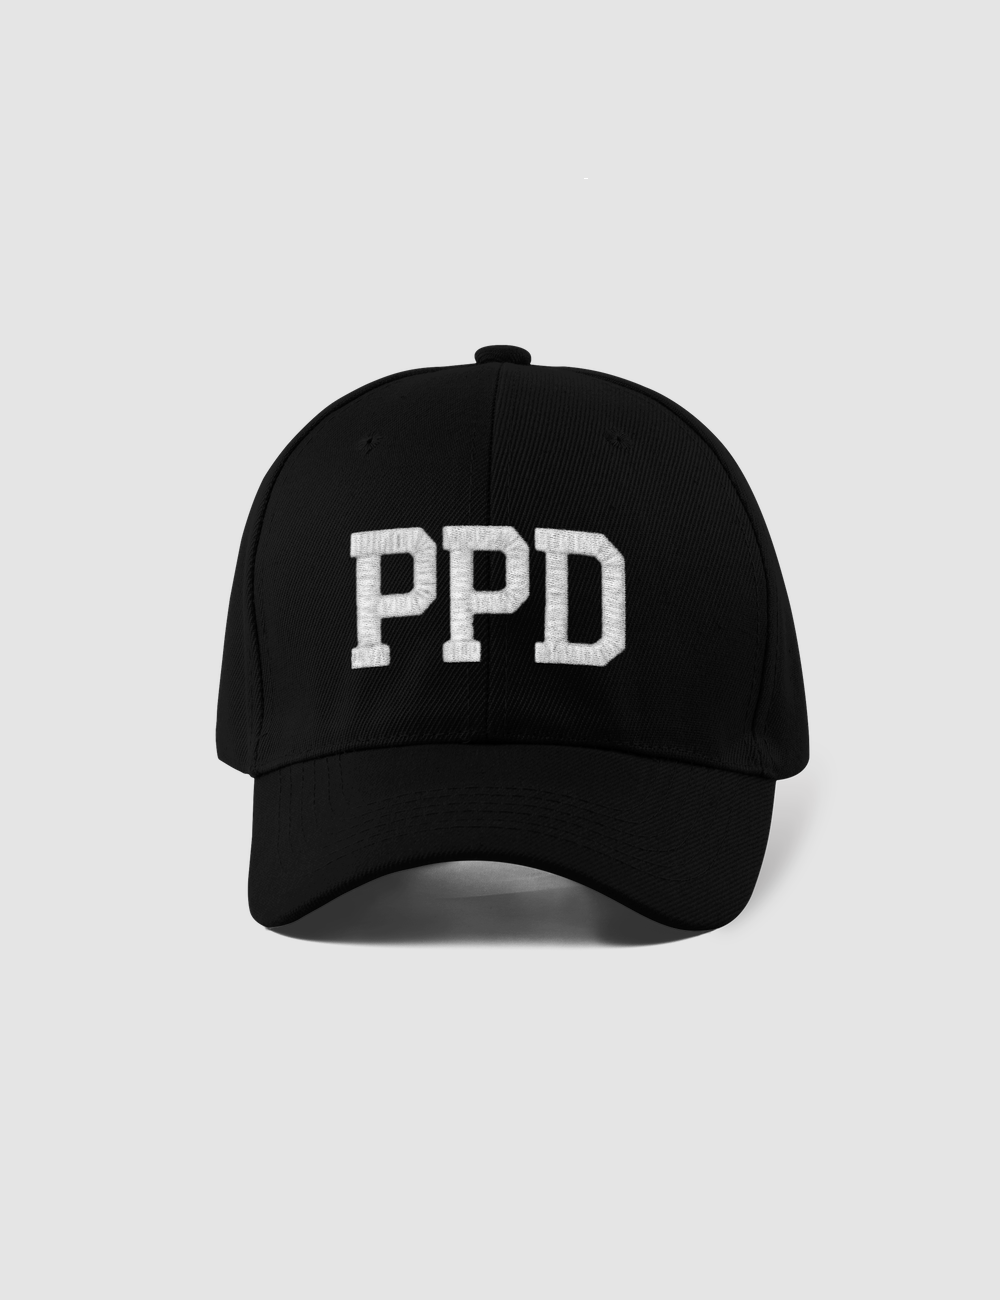 PPD (Front Only) Closed Back Flexfit Hat OniTakai